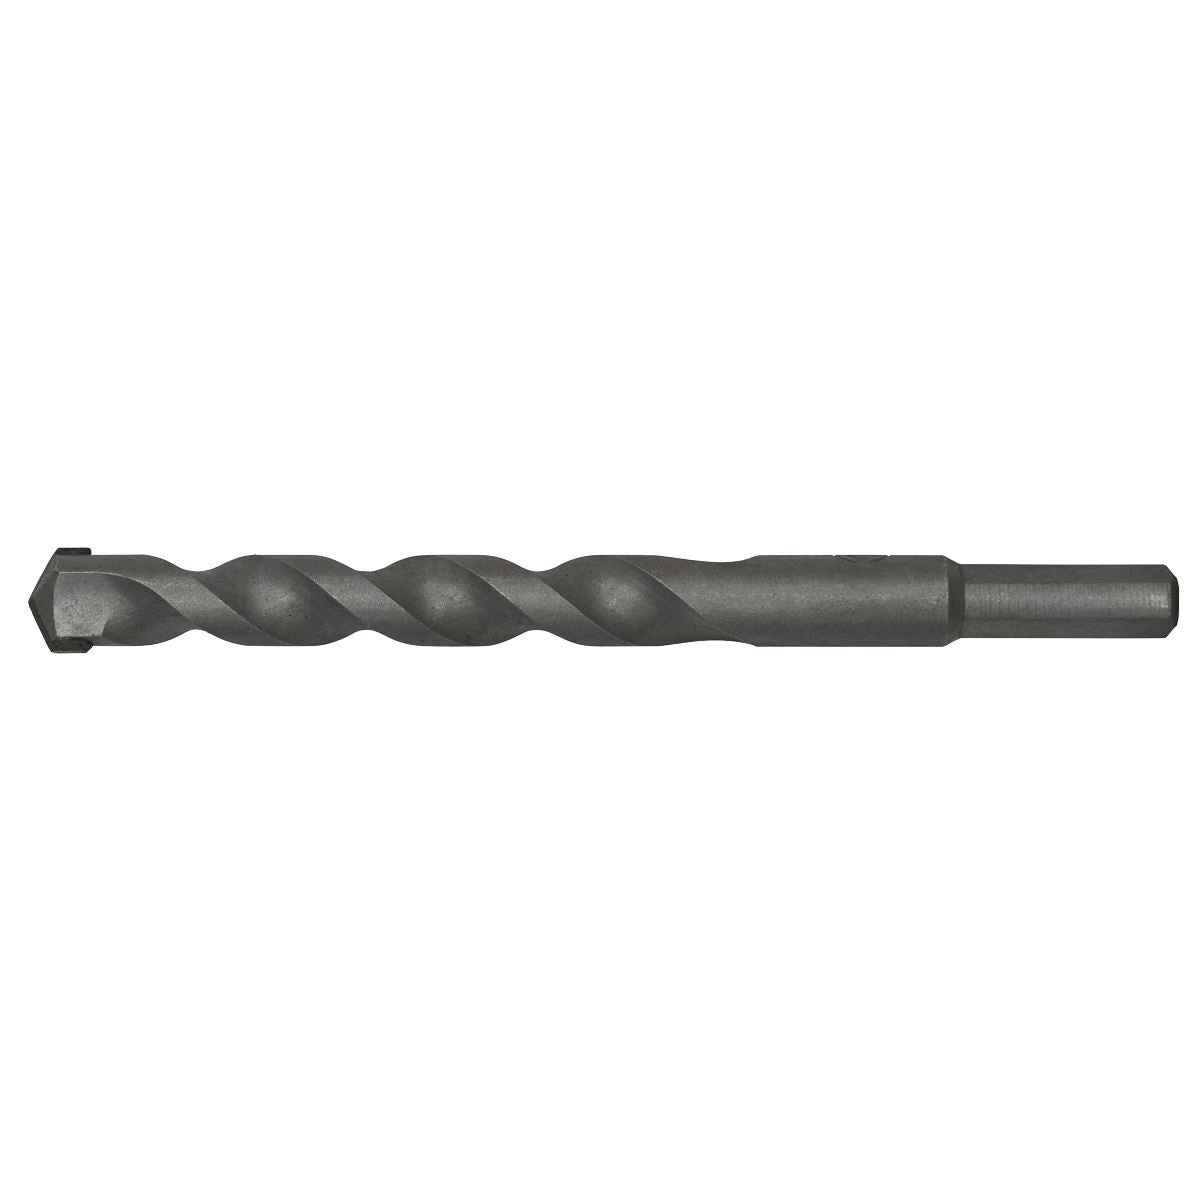 Worksafe by Sealey Straight Shank Rotary Impact Drill Bit Ø18 x 150mm